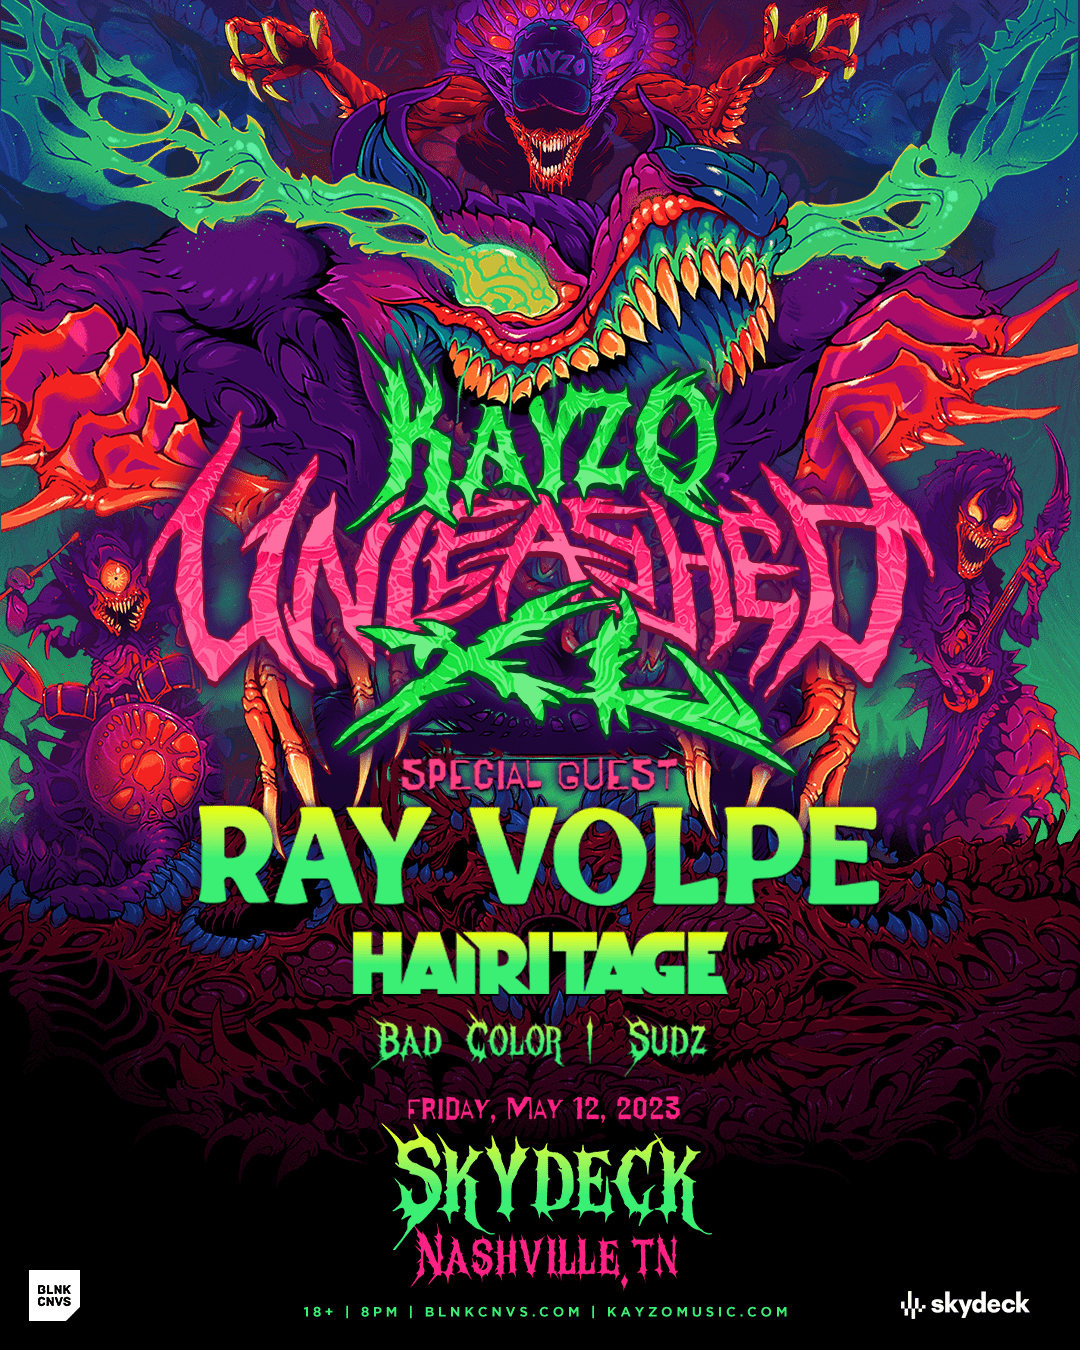 KAYZO Unleashed XL w/ Special Guest Ray Volpe Tickets at SkyDeck